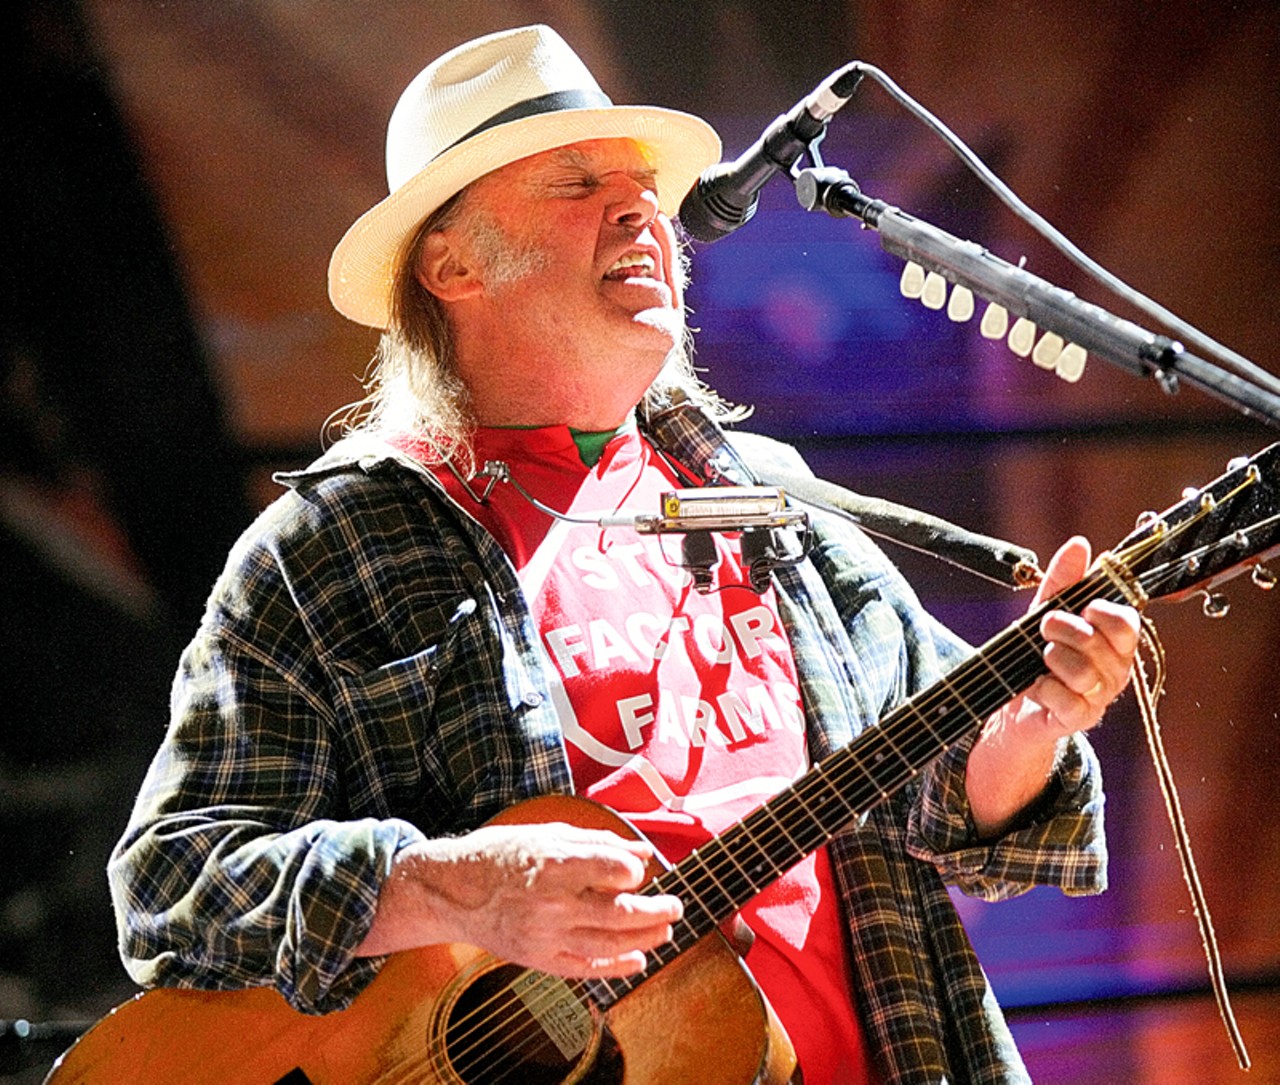 Neil Young. Read a review of Young's show and see his set list here.